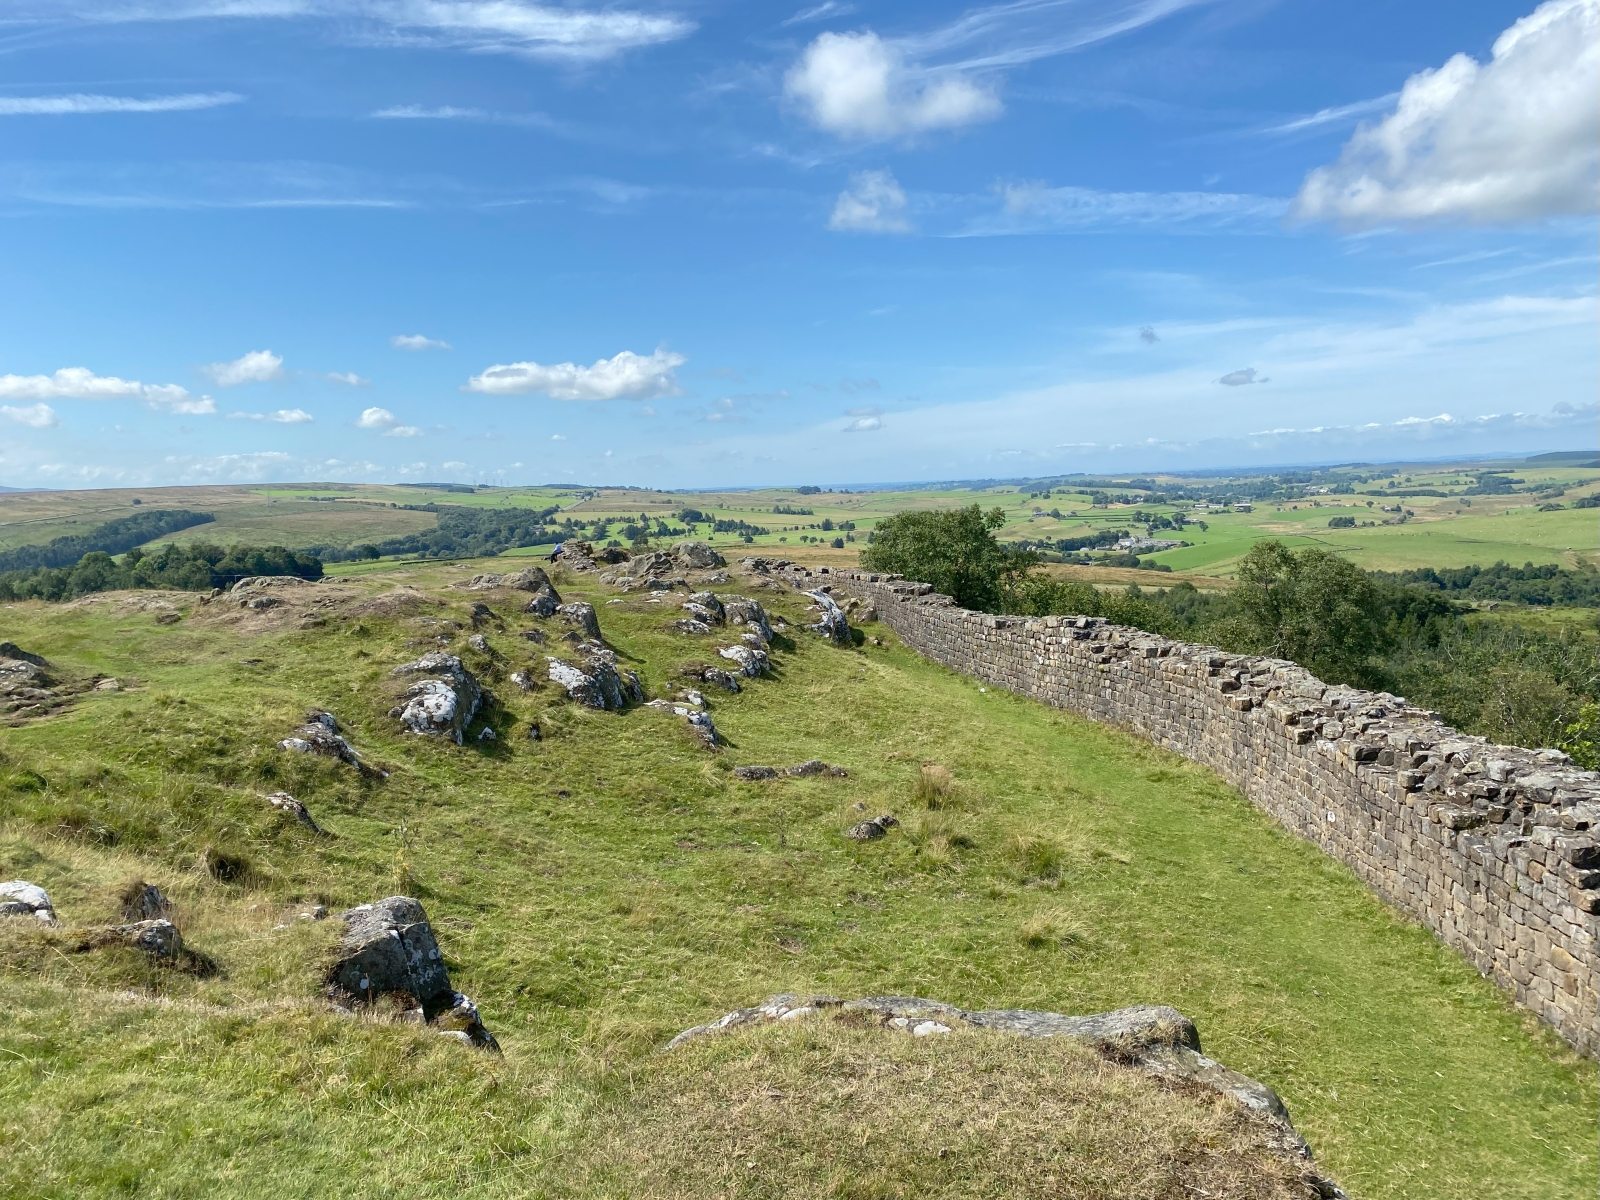 Visiting Hadrian’s Wall | Solo travel in England